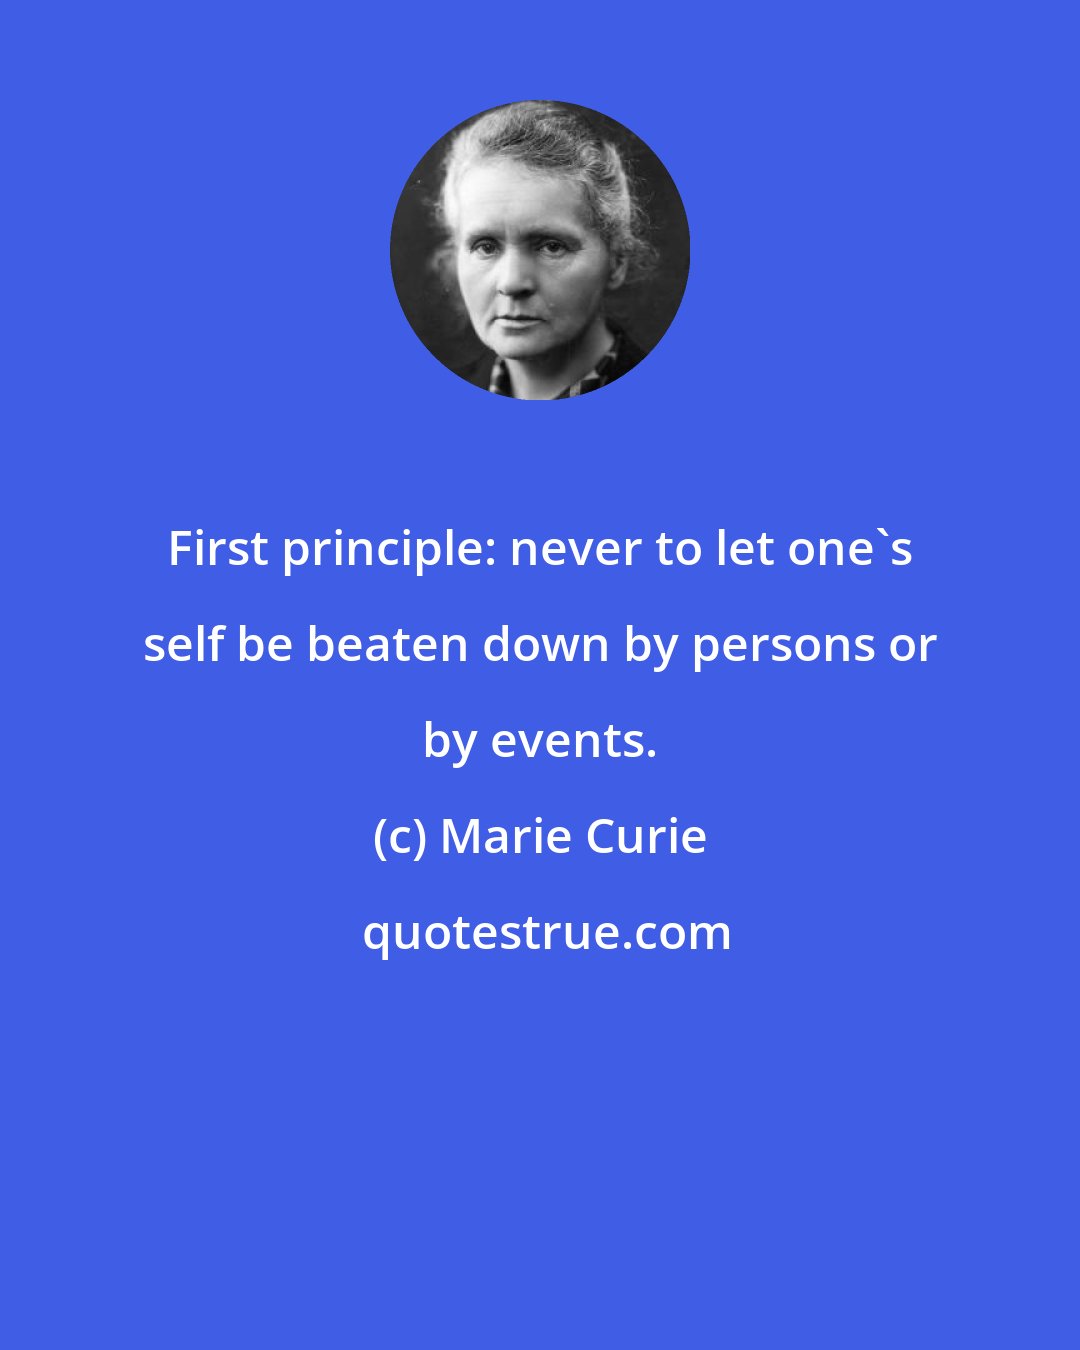 Marie Curie: First principle: never to let one's self be beaten down by persons or by events.